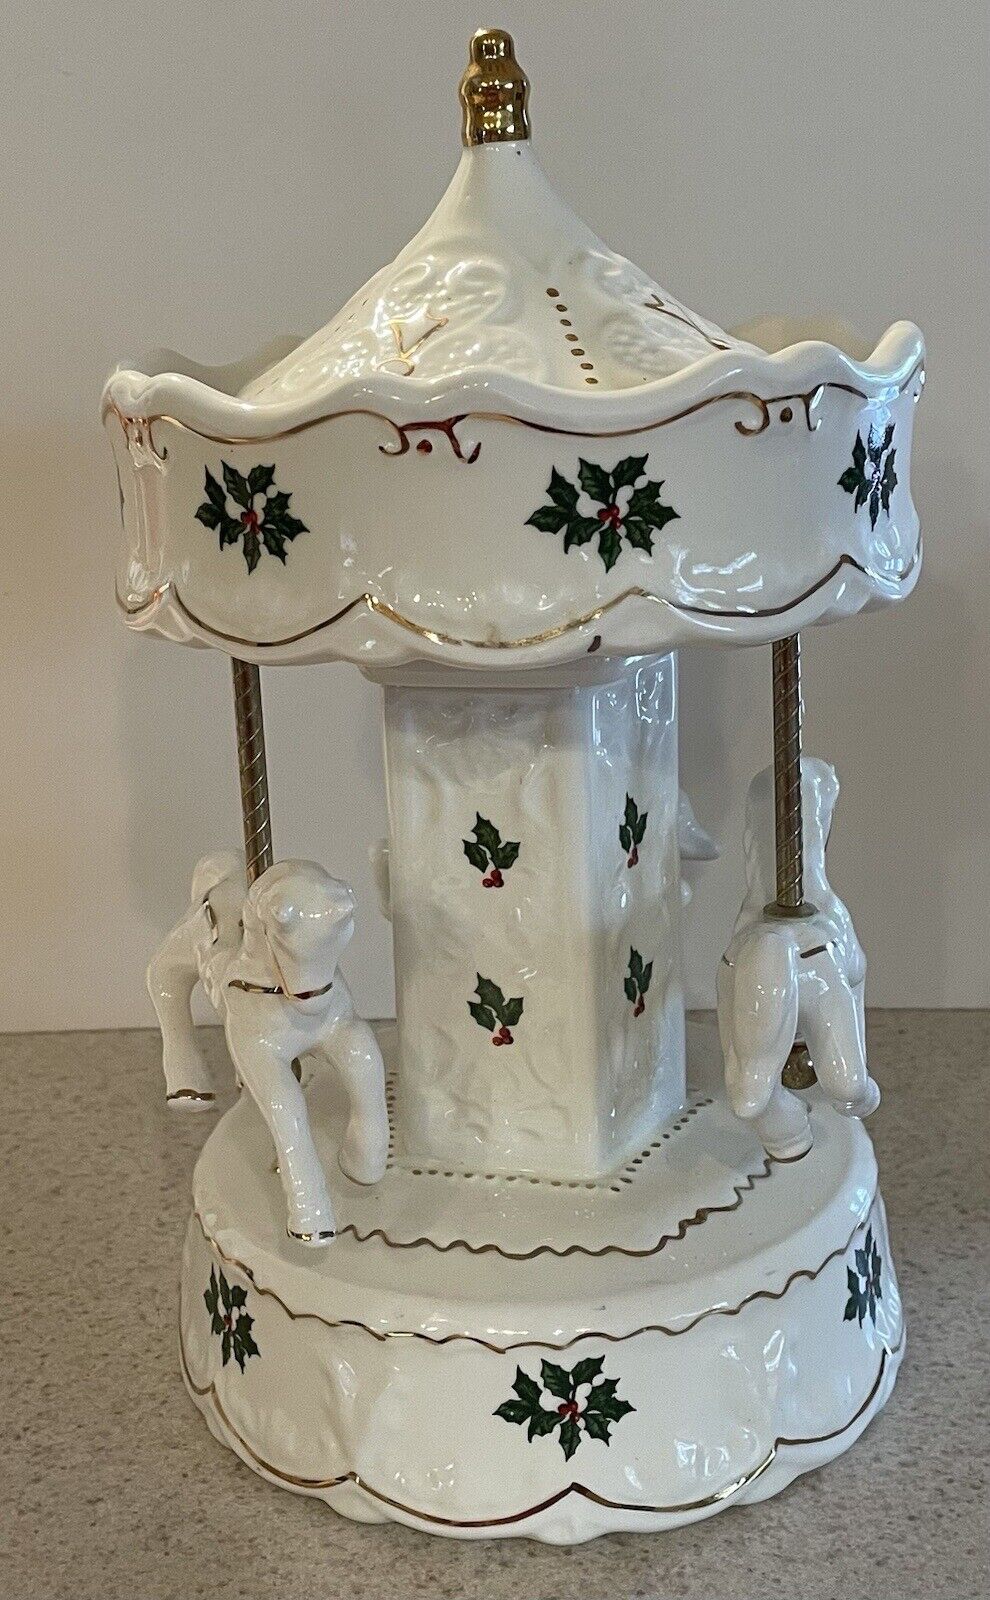 JCPenny Home Collection Christmas Porcelain Caroling Carousel Plays Jingle Bells